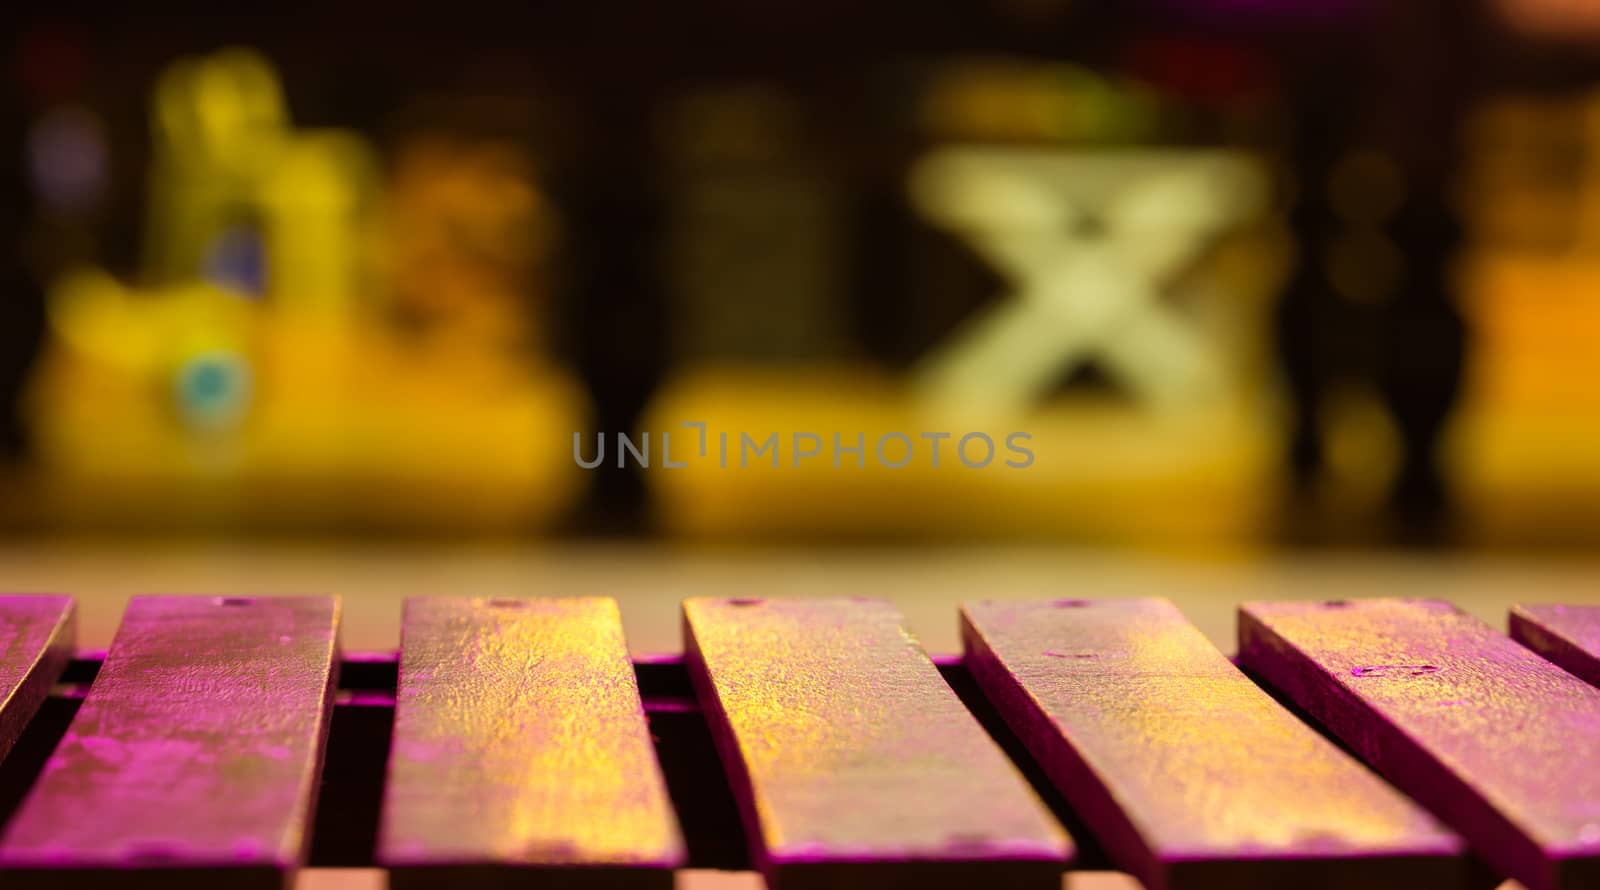 Empty wood bench on blur background with night light. by Fahroni